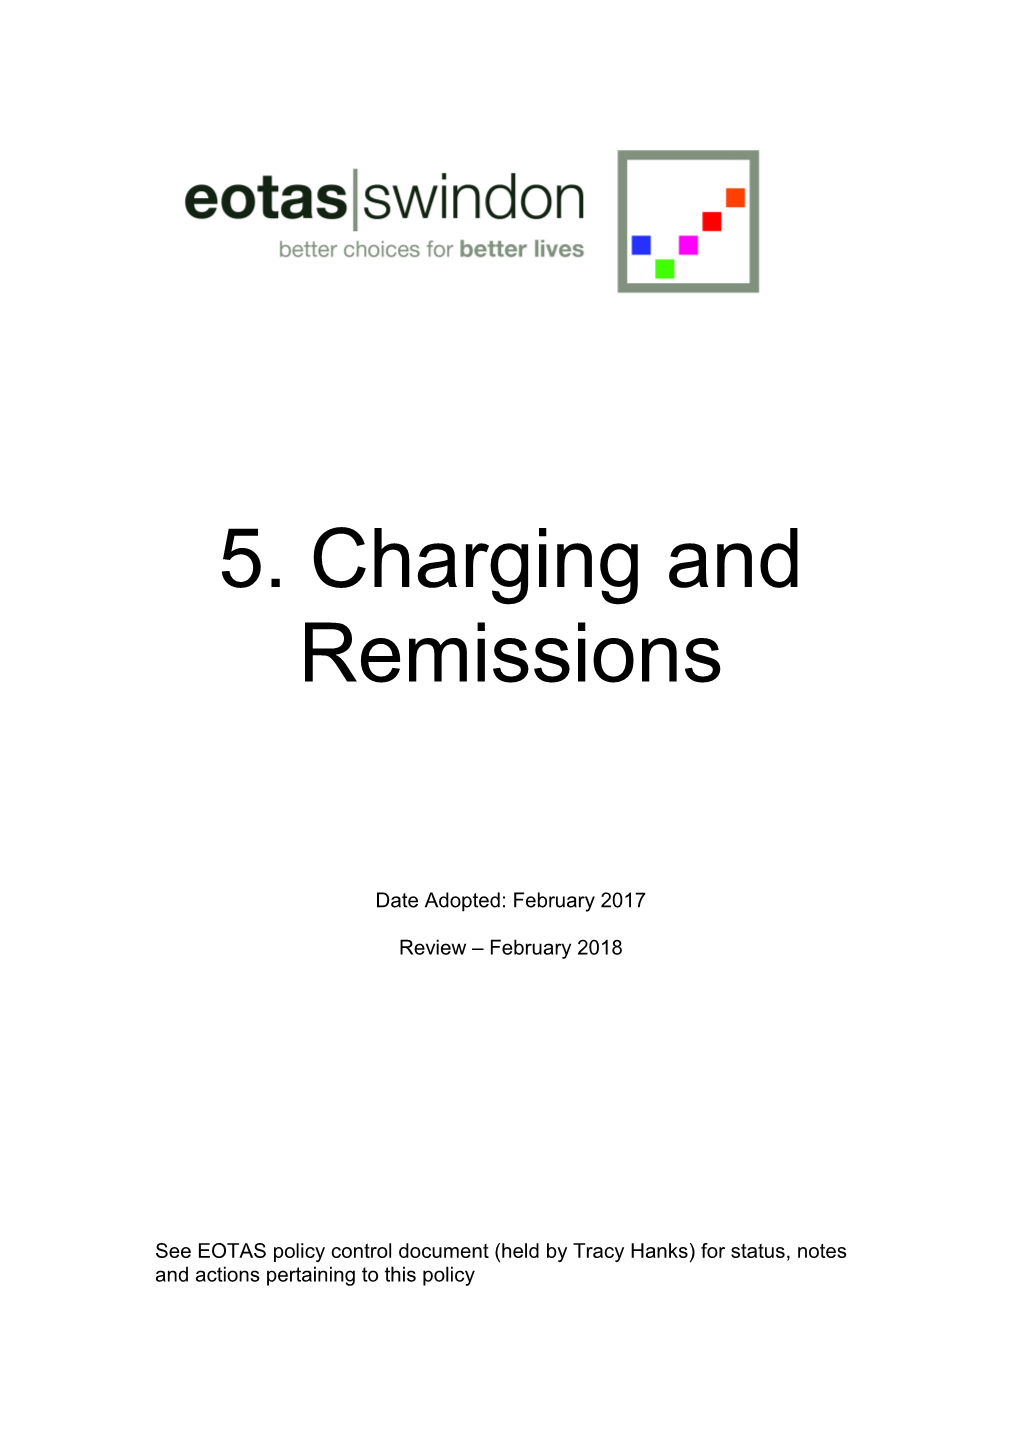 Chargingfor Damages (To Be Read in Conjunction with the Behaviour Policy Number 25)